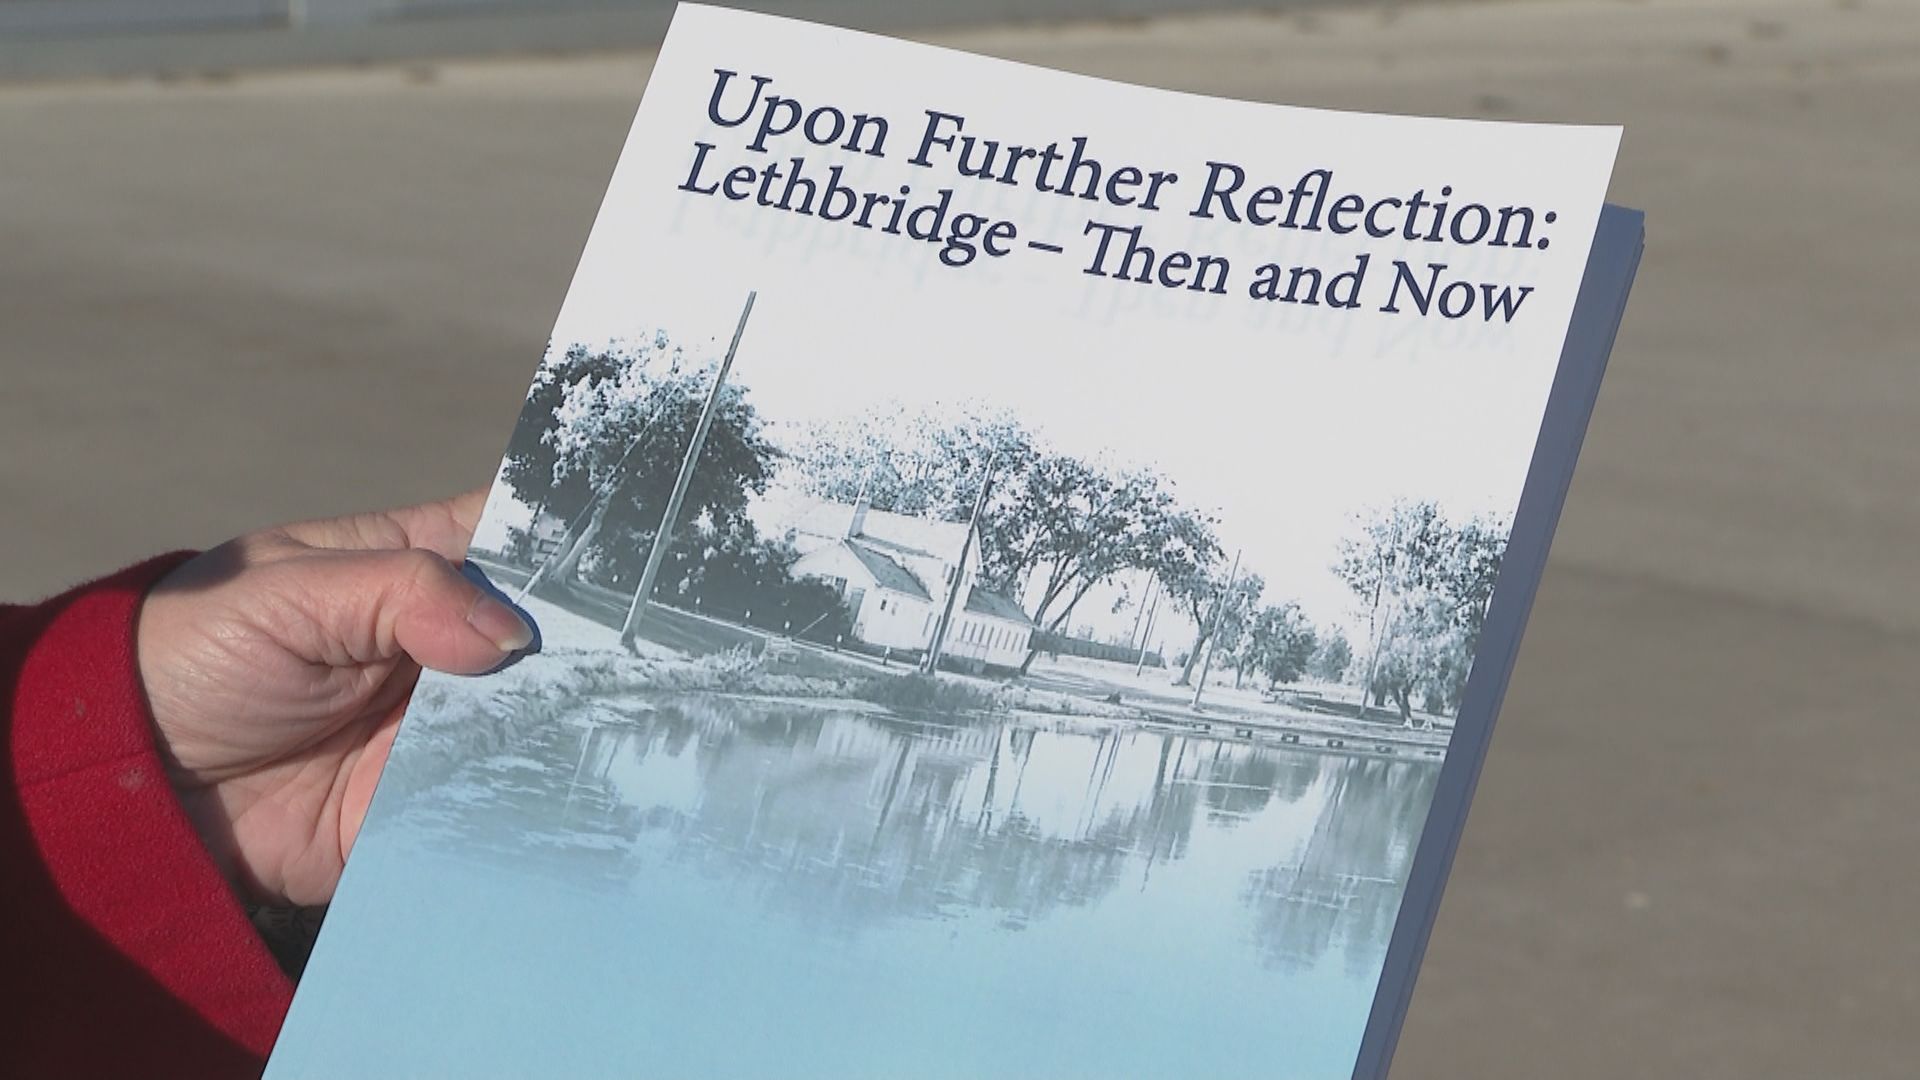 New picture book takes readers through Lethbridge’s transformation